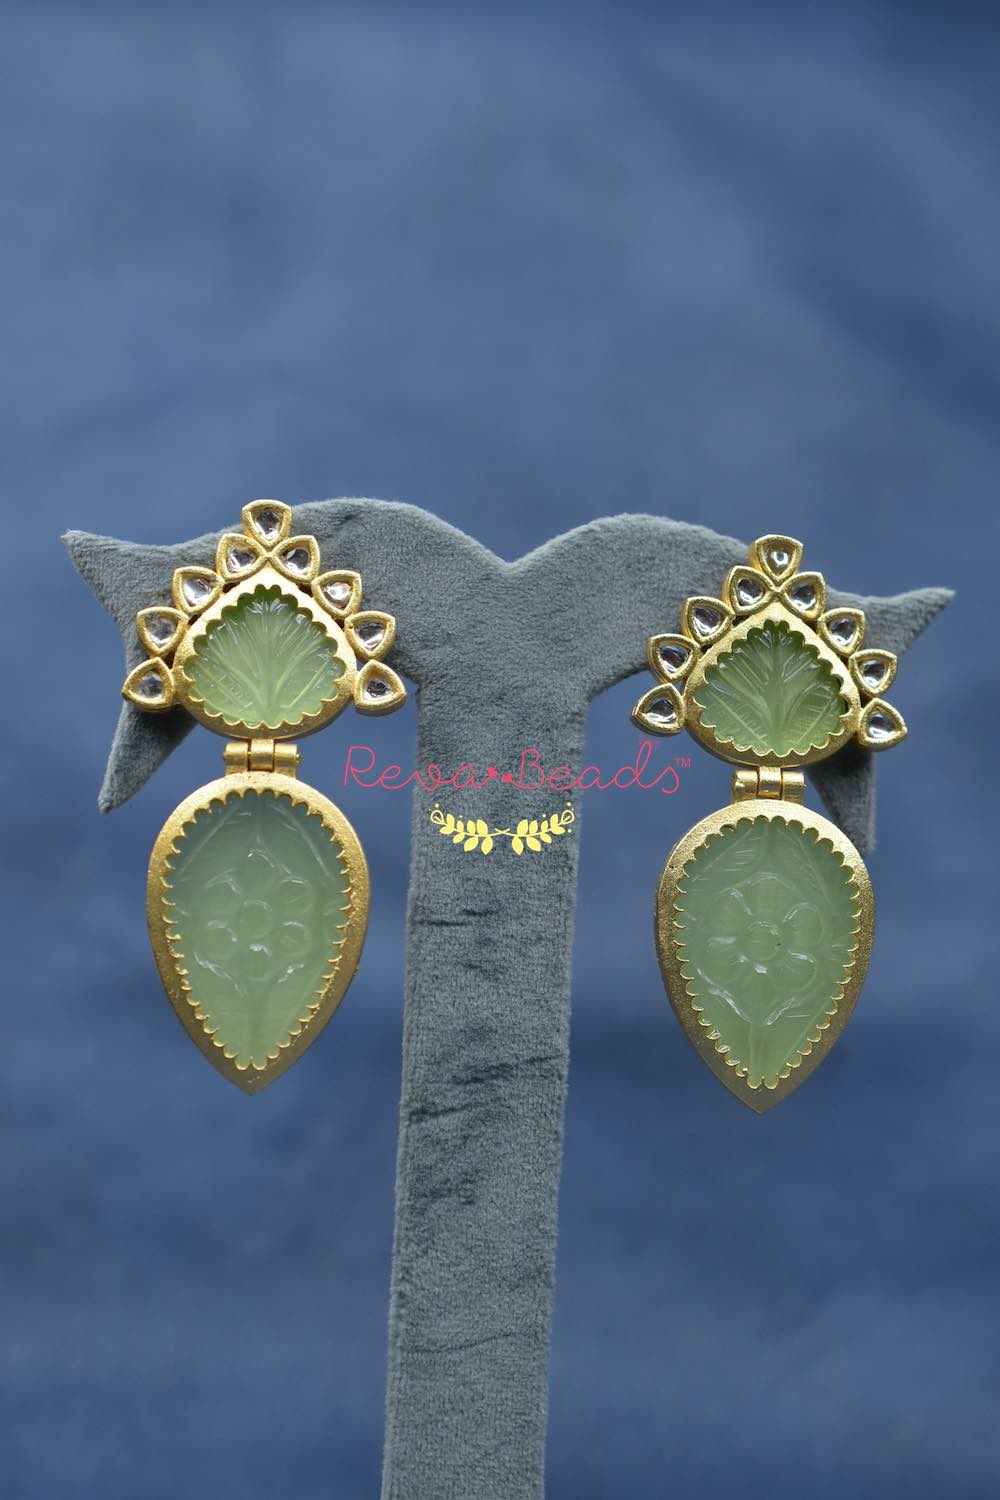 Hand Carved A Grade Natural Jadeite Jade Peas Pod Sterling Silver Earrings  - 3JADE wholesale of jade carvings, jewelry, collectables, prayer beads